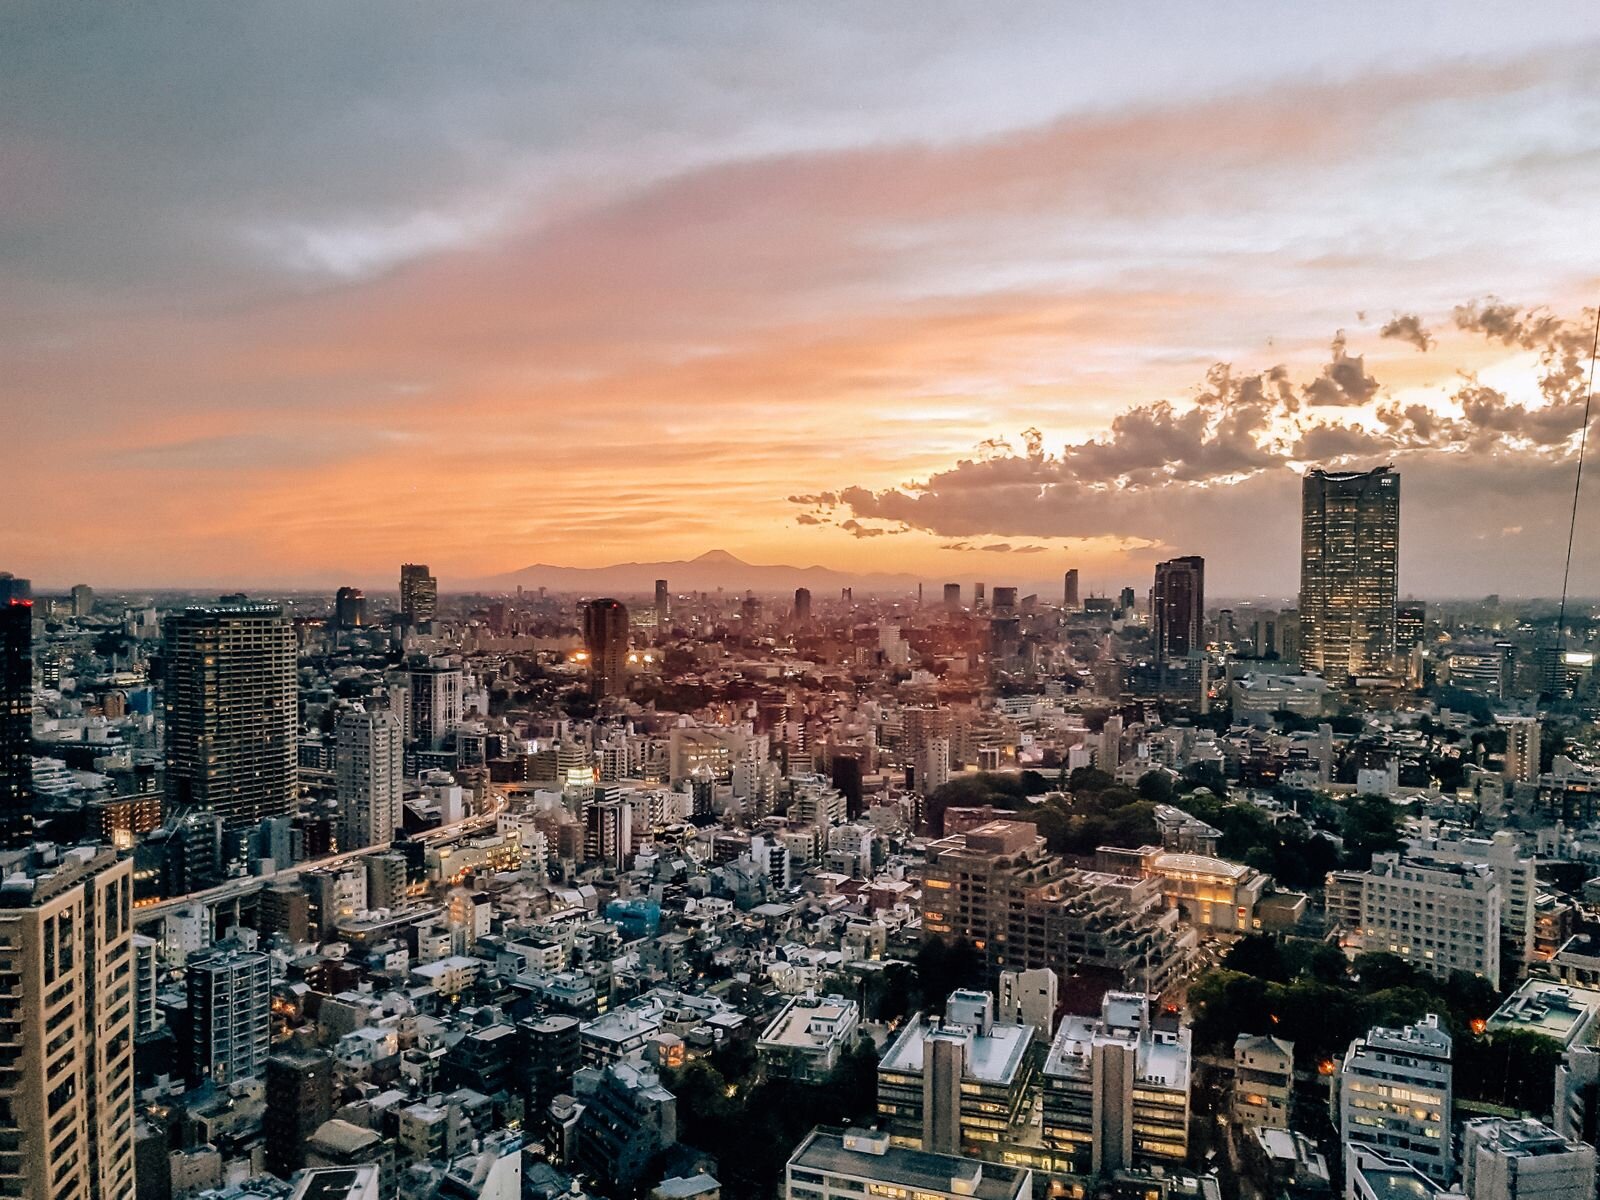 The many buildings stretching into the distance at sunset of the Tokyo skyline